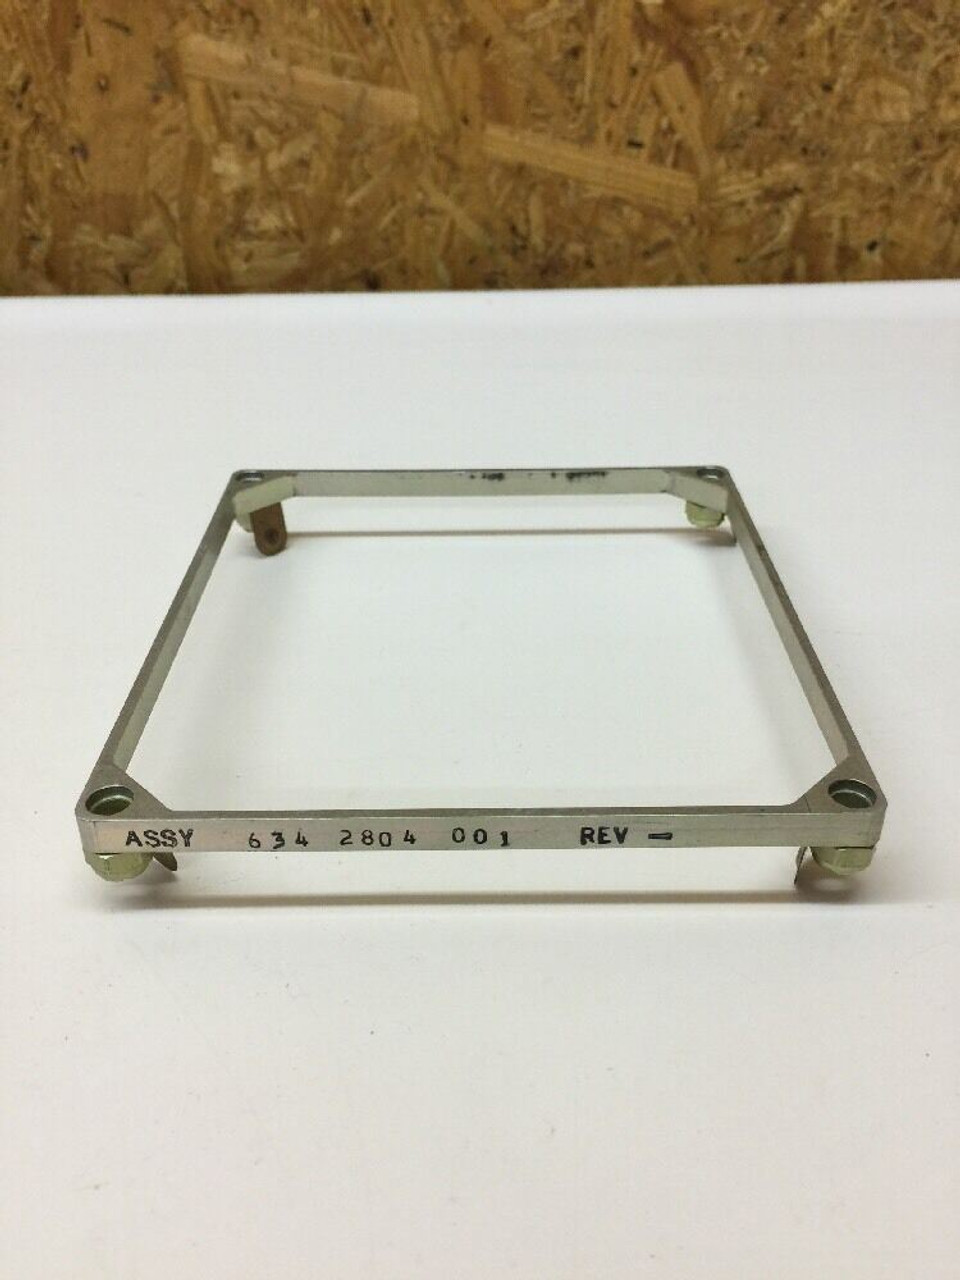 5" Mooring Plate 634-2804-001 Rockwell Collins Aircraft